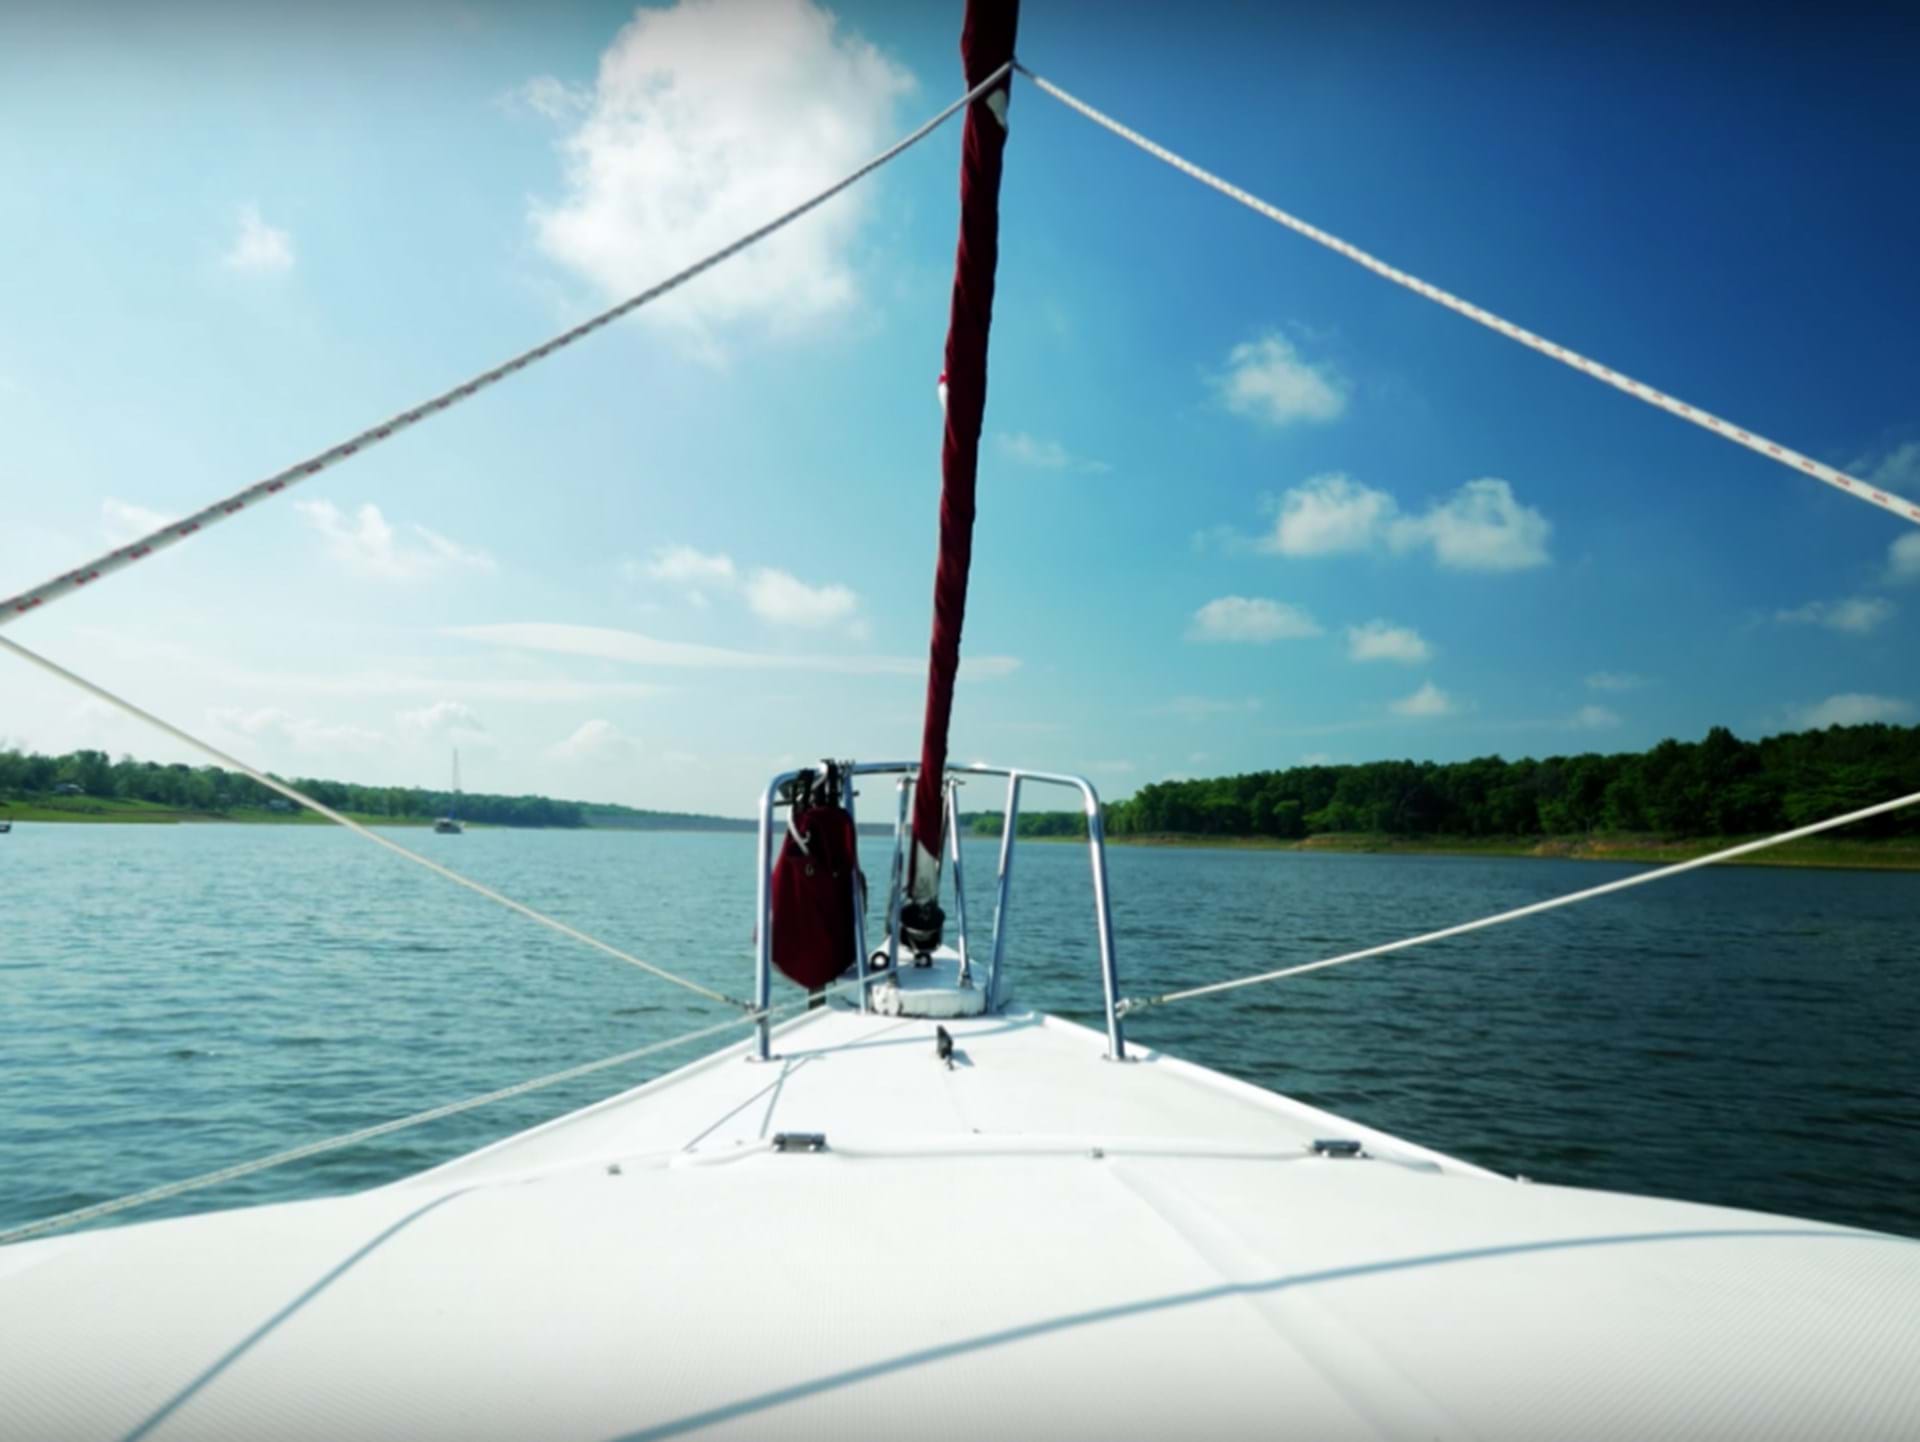 Lake Rathbun offers some of the best sailing in Iowa.